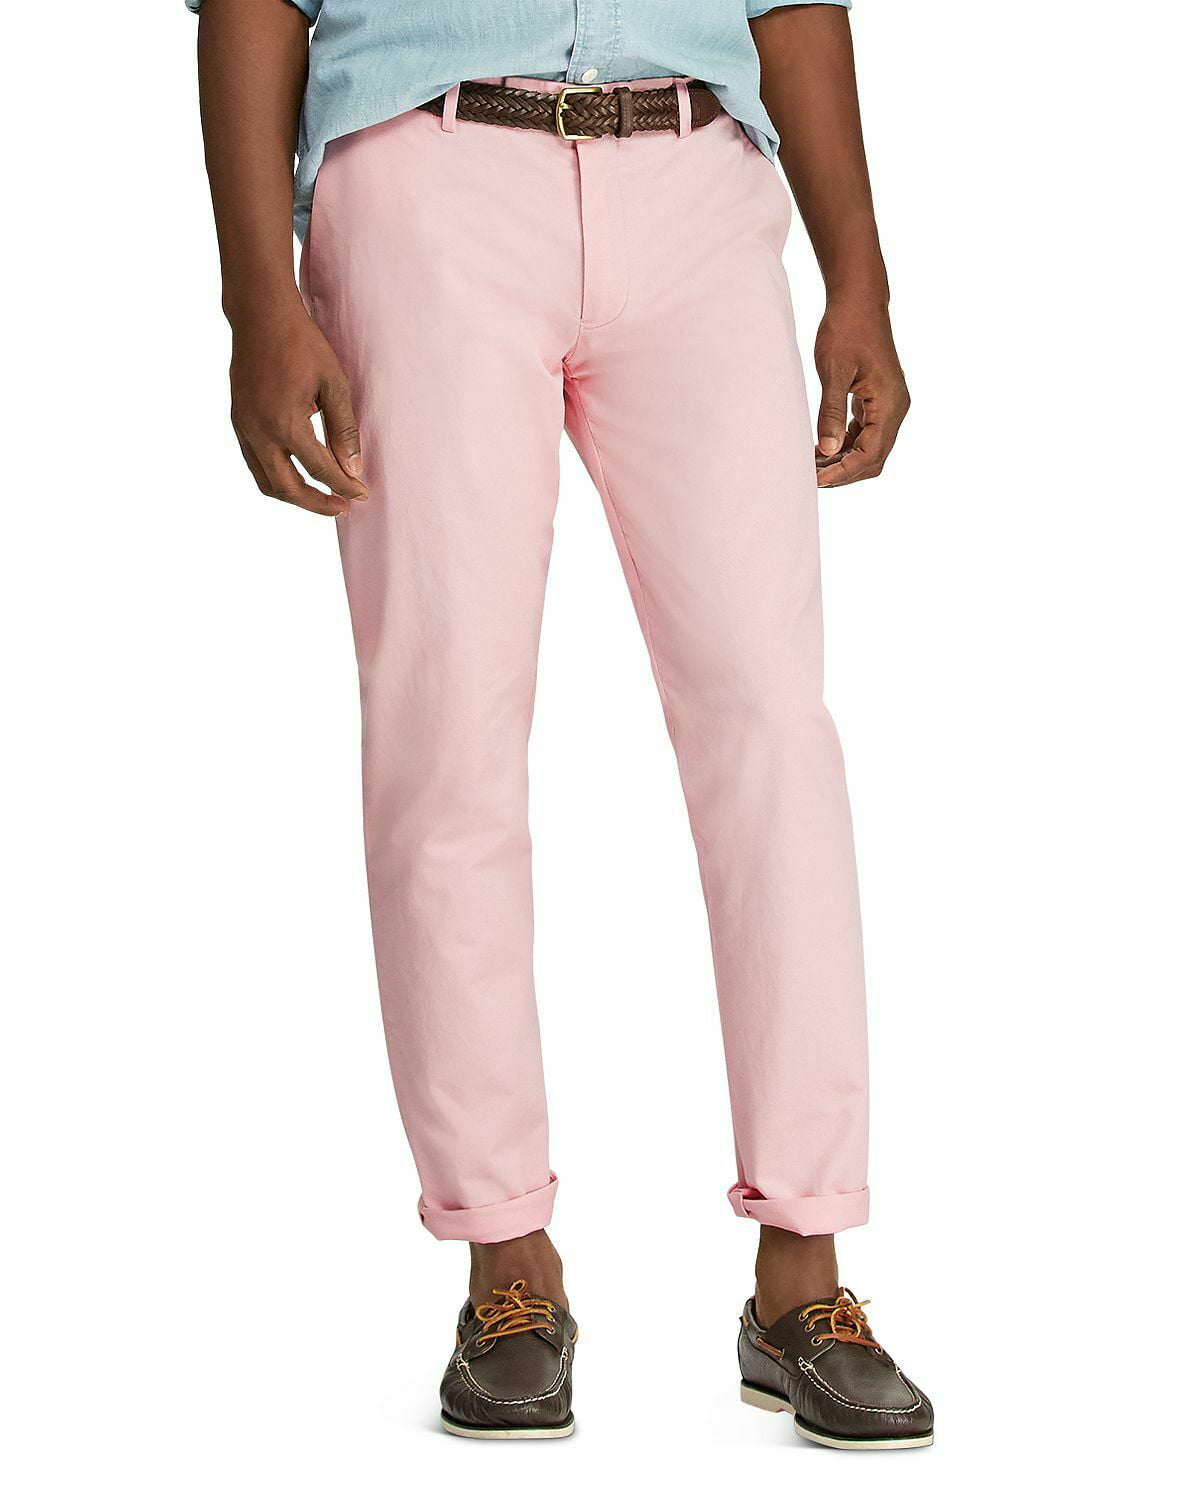 Men's POLO RALPH LAUREN STRETCH SLIM FIT CHINO PANTS MSRP $125 B4HP (38  in,30 in,Pink Stretch Straight Fit) 